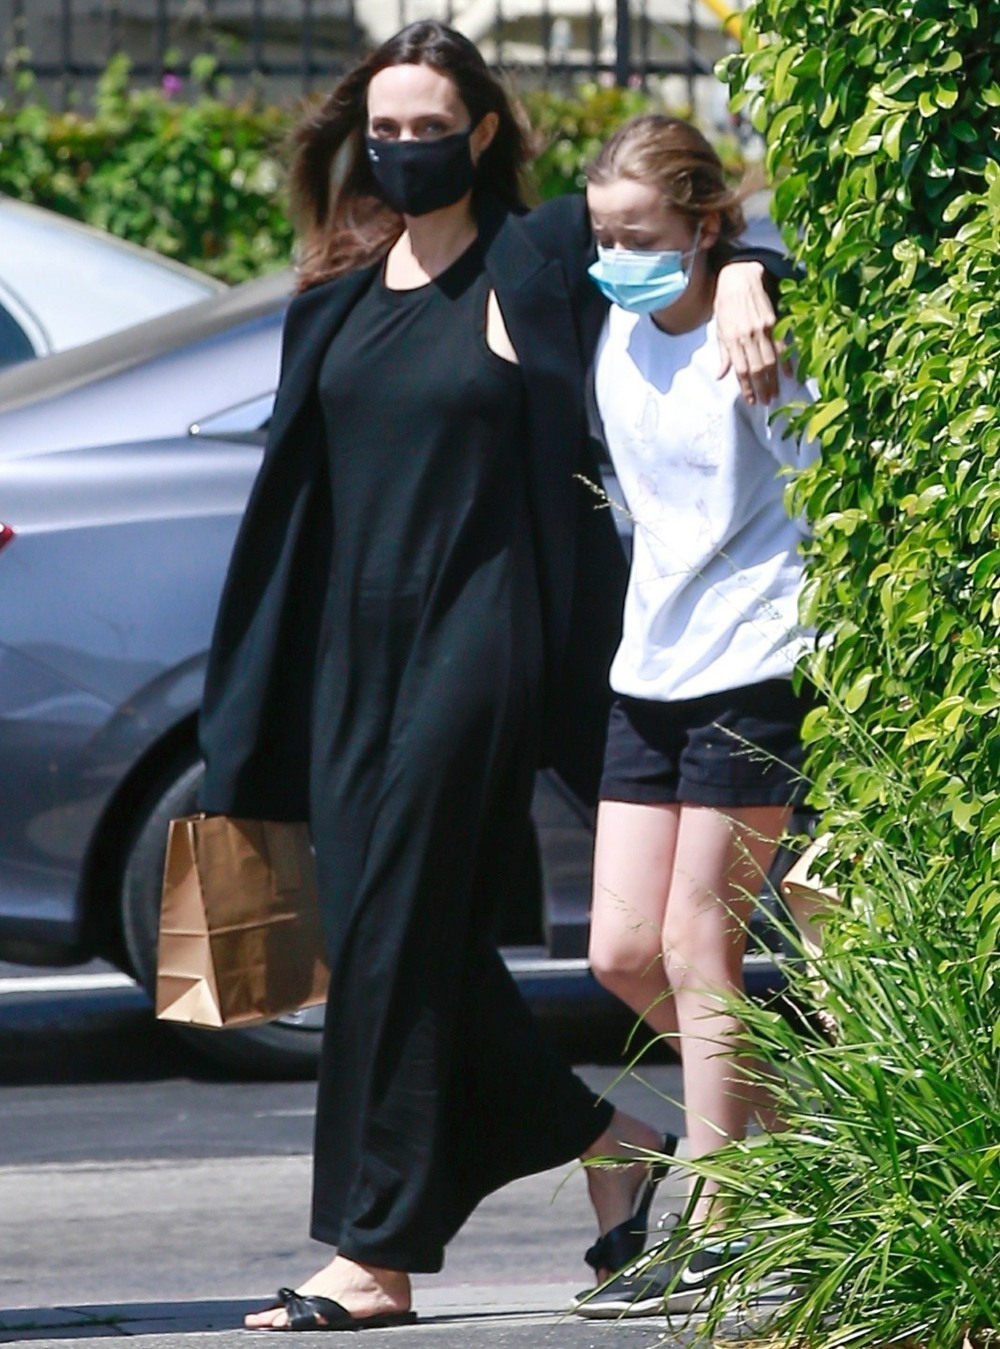 Angelina Jolie and her daughter Vivienne go shopping for flowers together